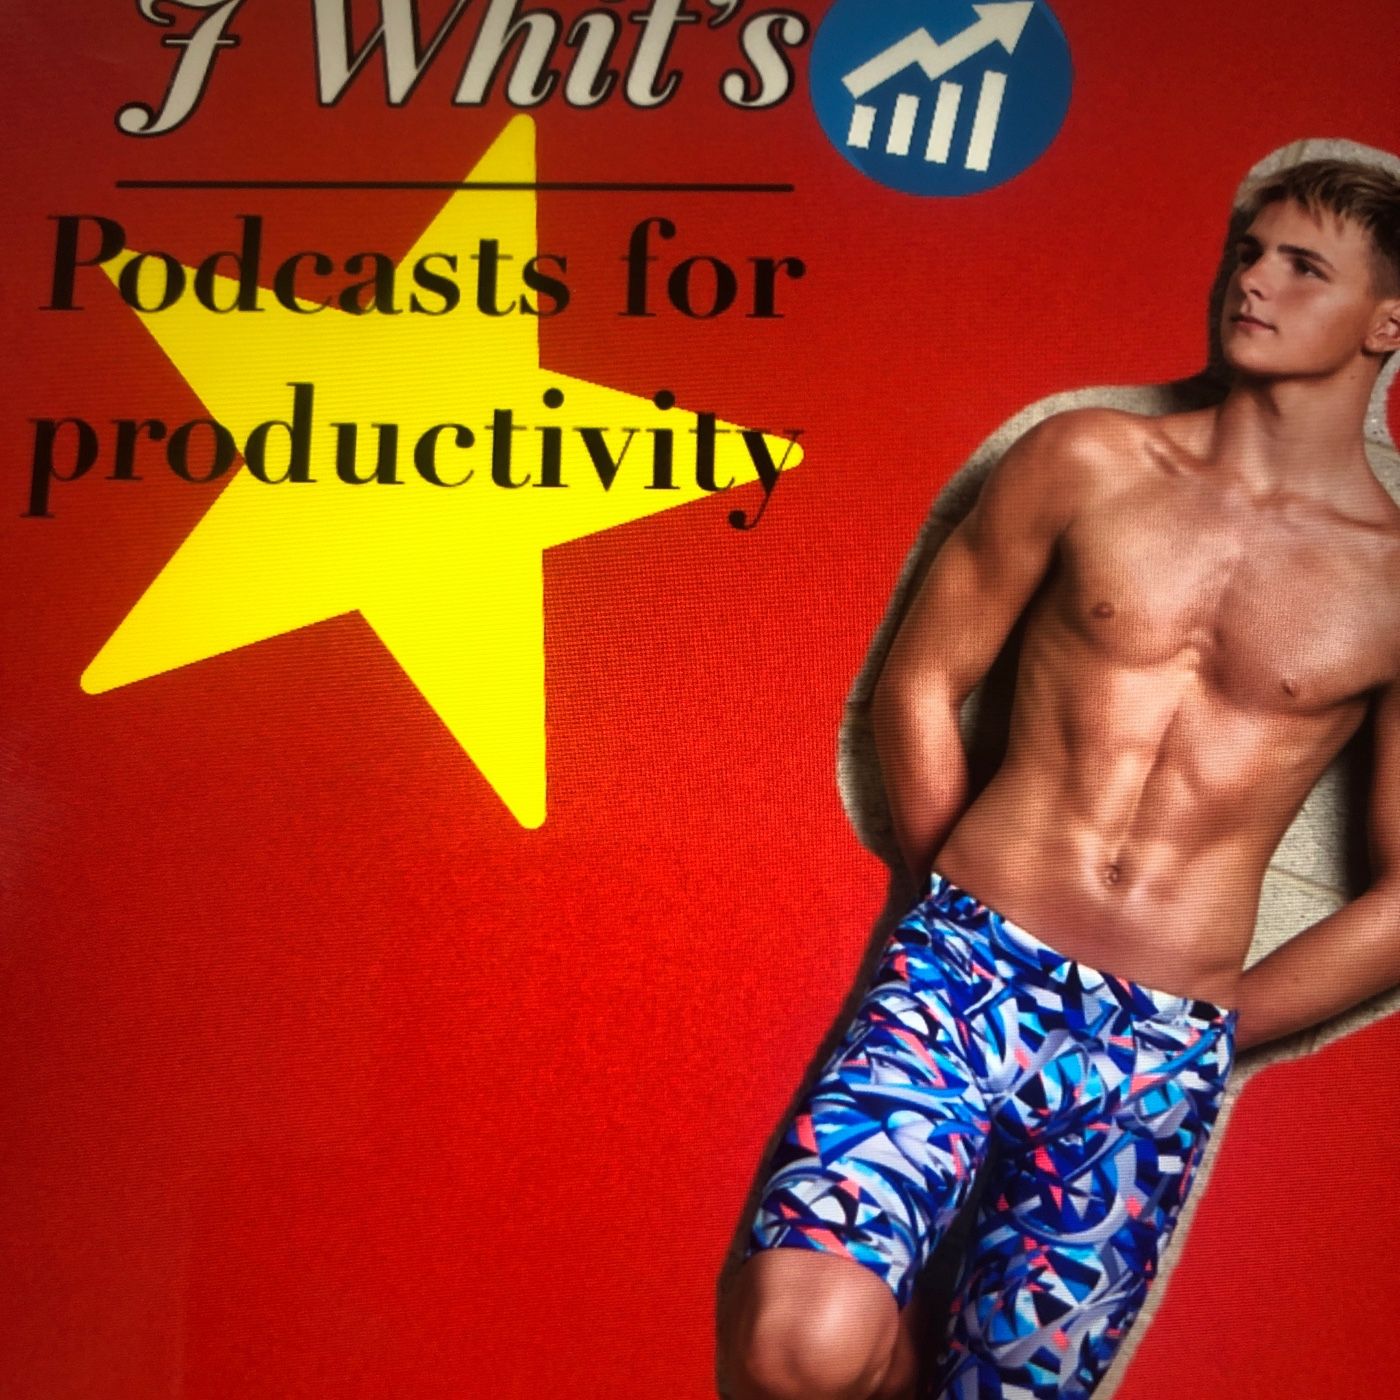 Episode 2 - J Whit’s: Podcasts For Productivity